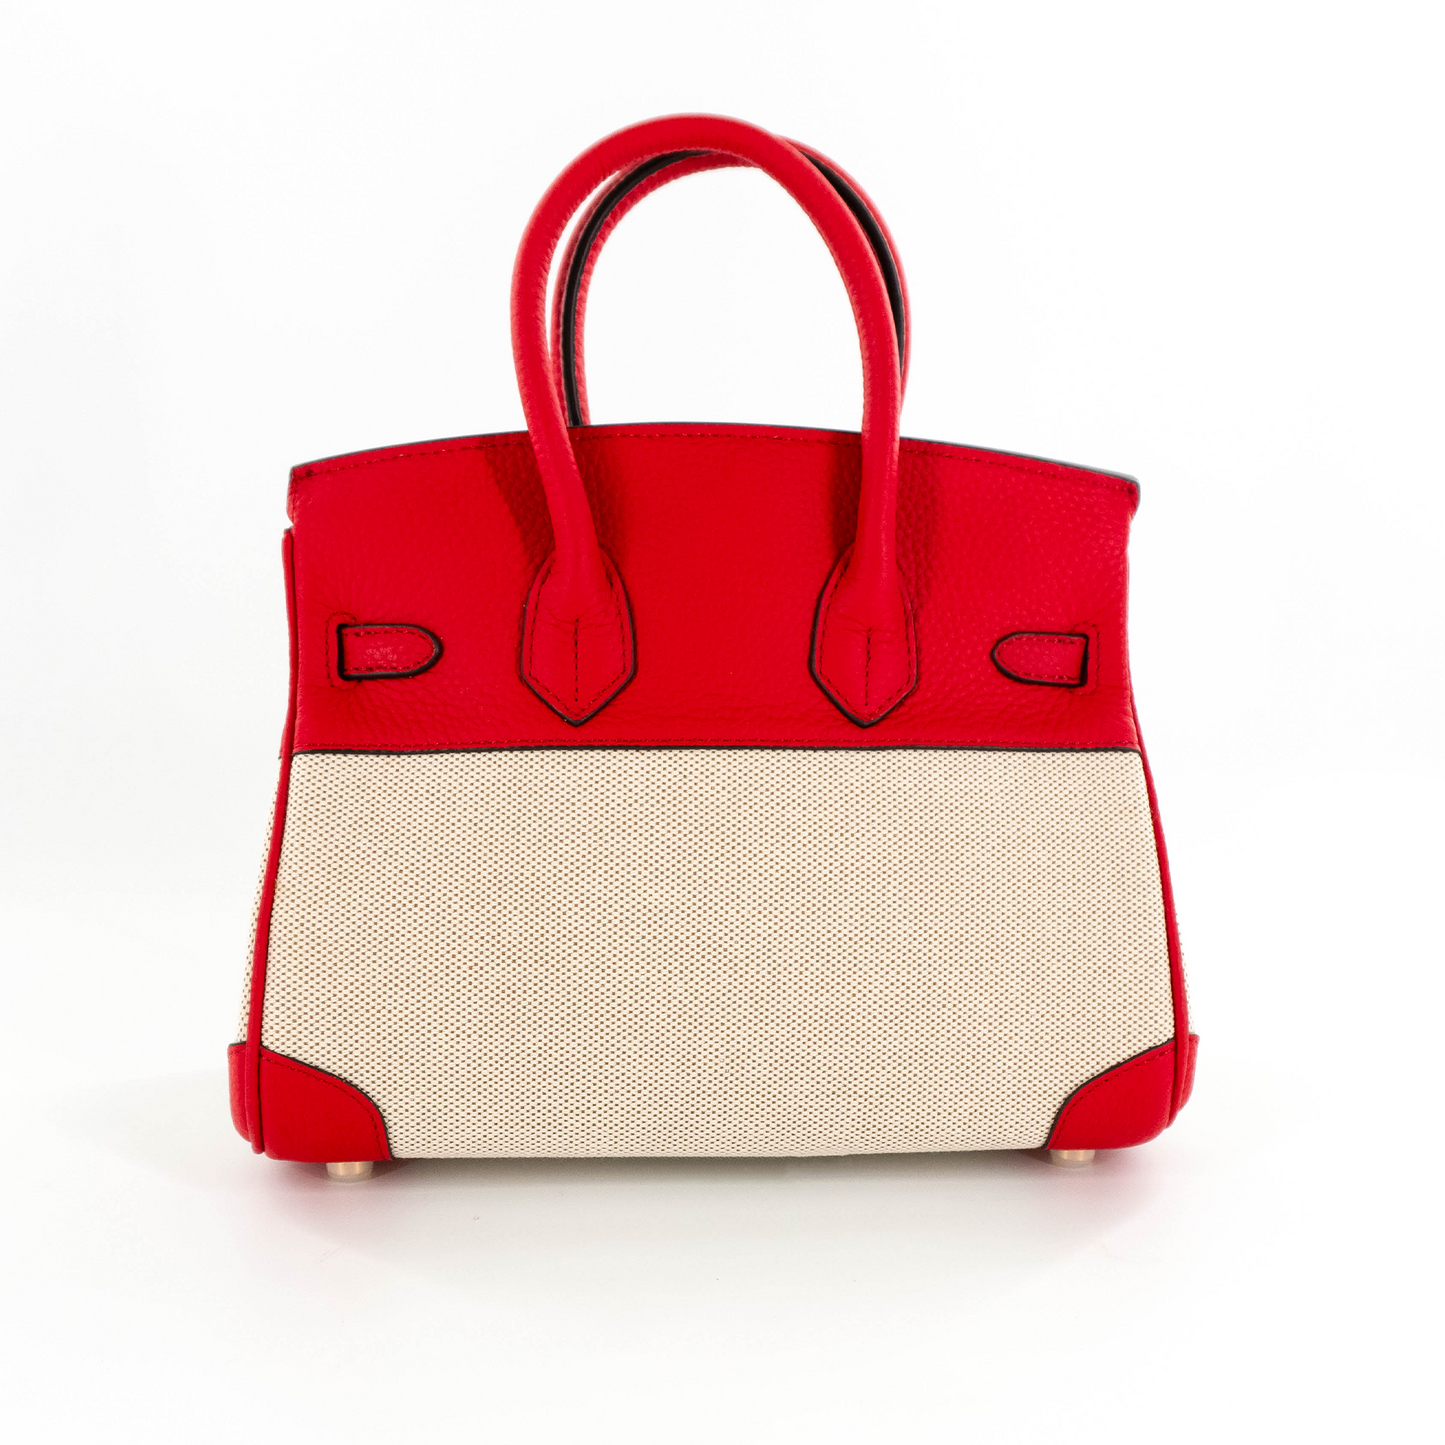 Duchess Handbag in Linen and Red Leather